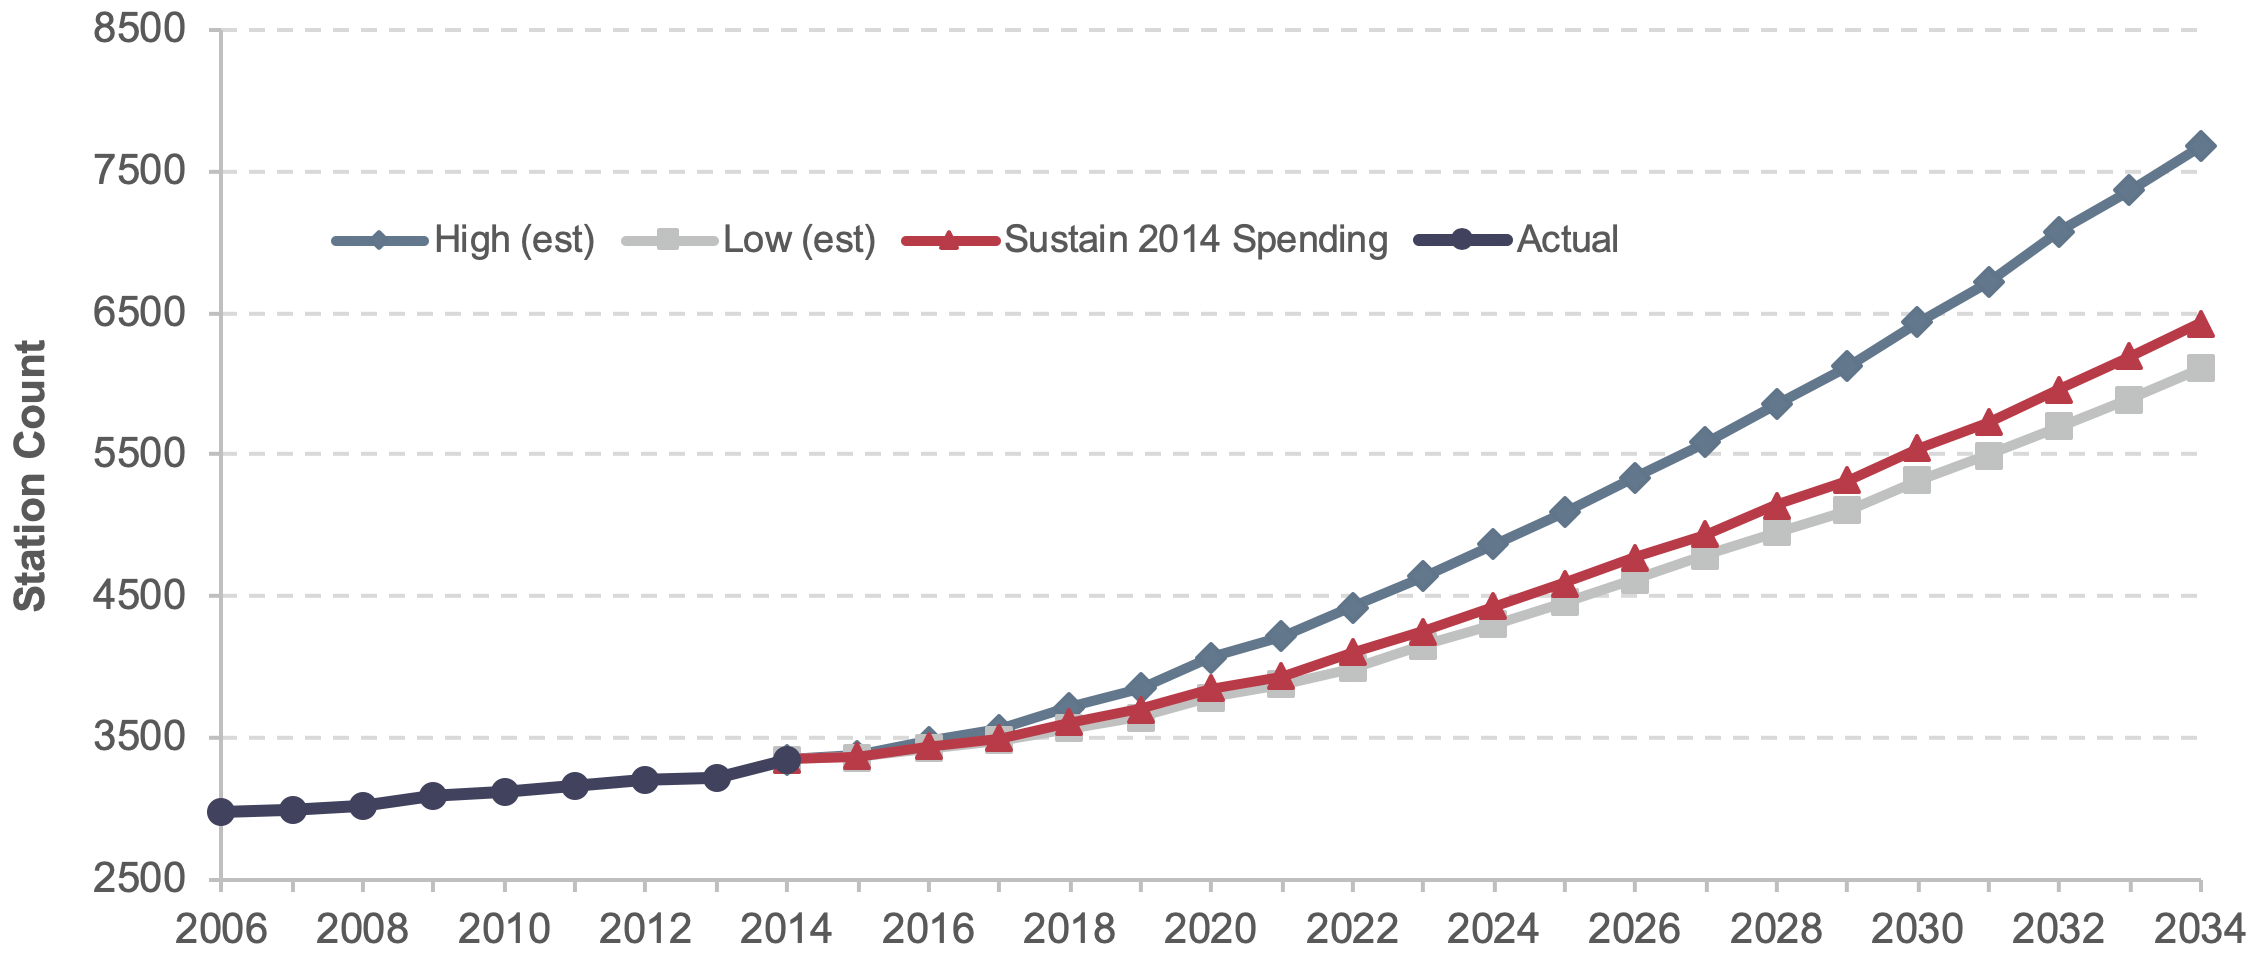 A line graph plots values for station count over time from 2006 to 2034 for four scenarios. The plot for actual vehicle count extends from a value of 2,975 in the year 2006 to a value of 3,344 in the year 2014. Remaining plots extend from this value. The plot for the high(est) growth scenario extend to a value of 7,680 in the year 2034. The plot for the low(est) growth scenario extends to the value 6,106 in the year 2034. The plot for the sustain 2014 spending scenario extends to a value of 6,426 in the year 2034. Source: Transit Economic Requirements Model.